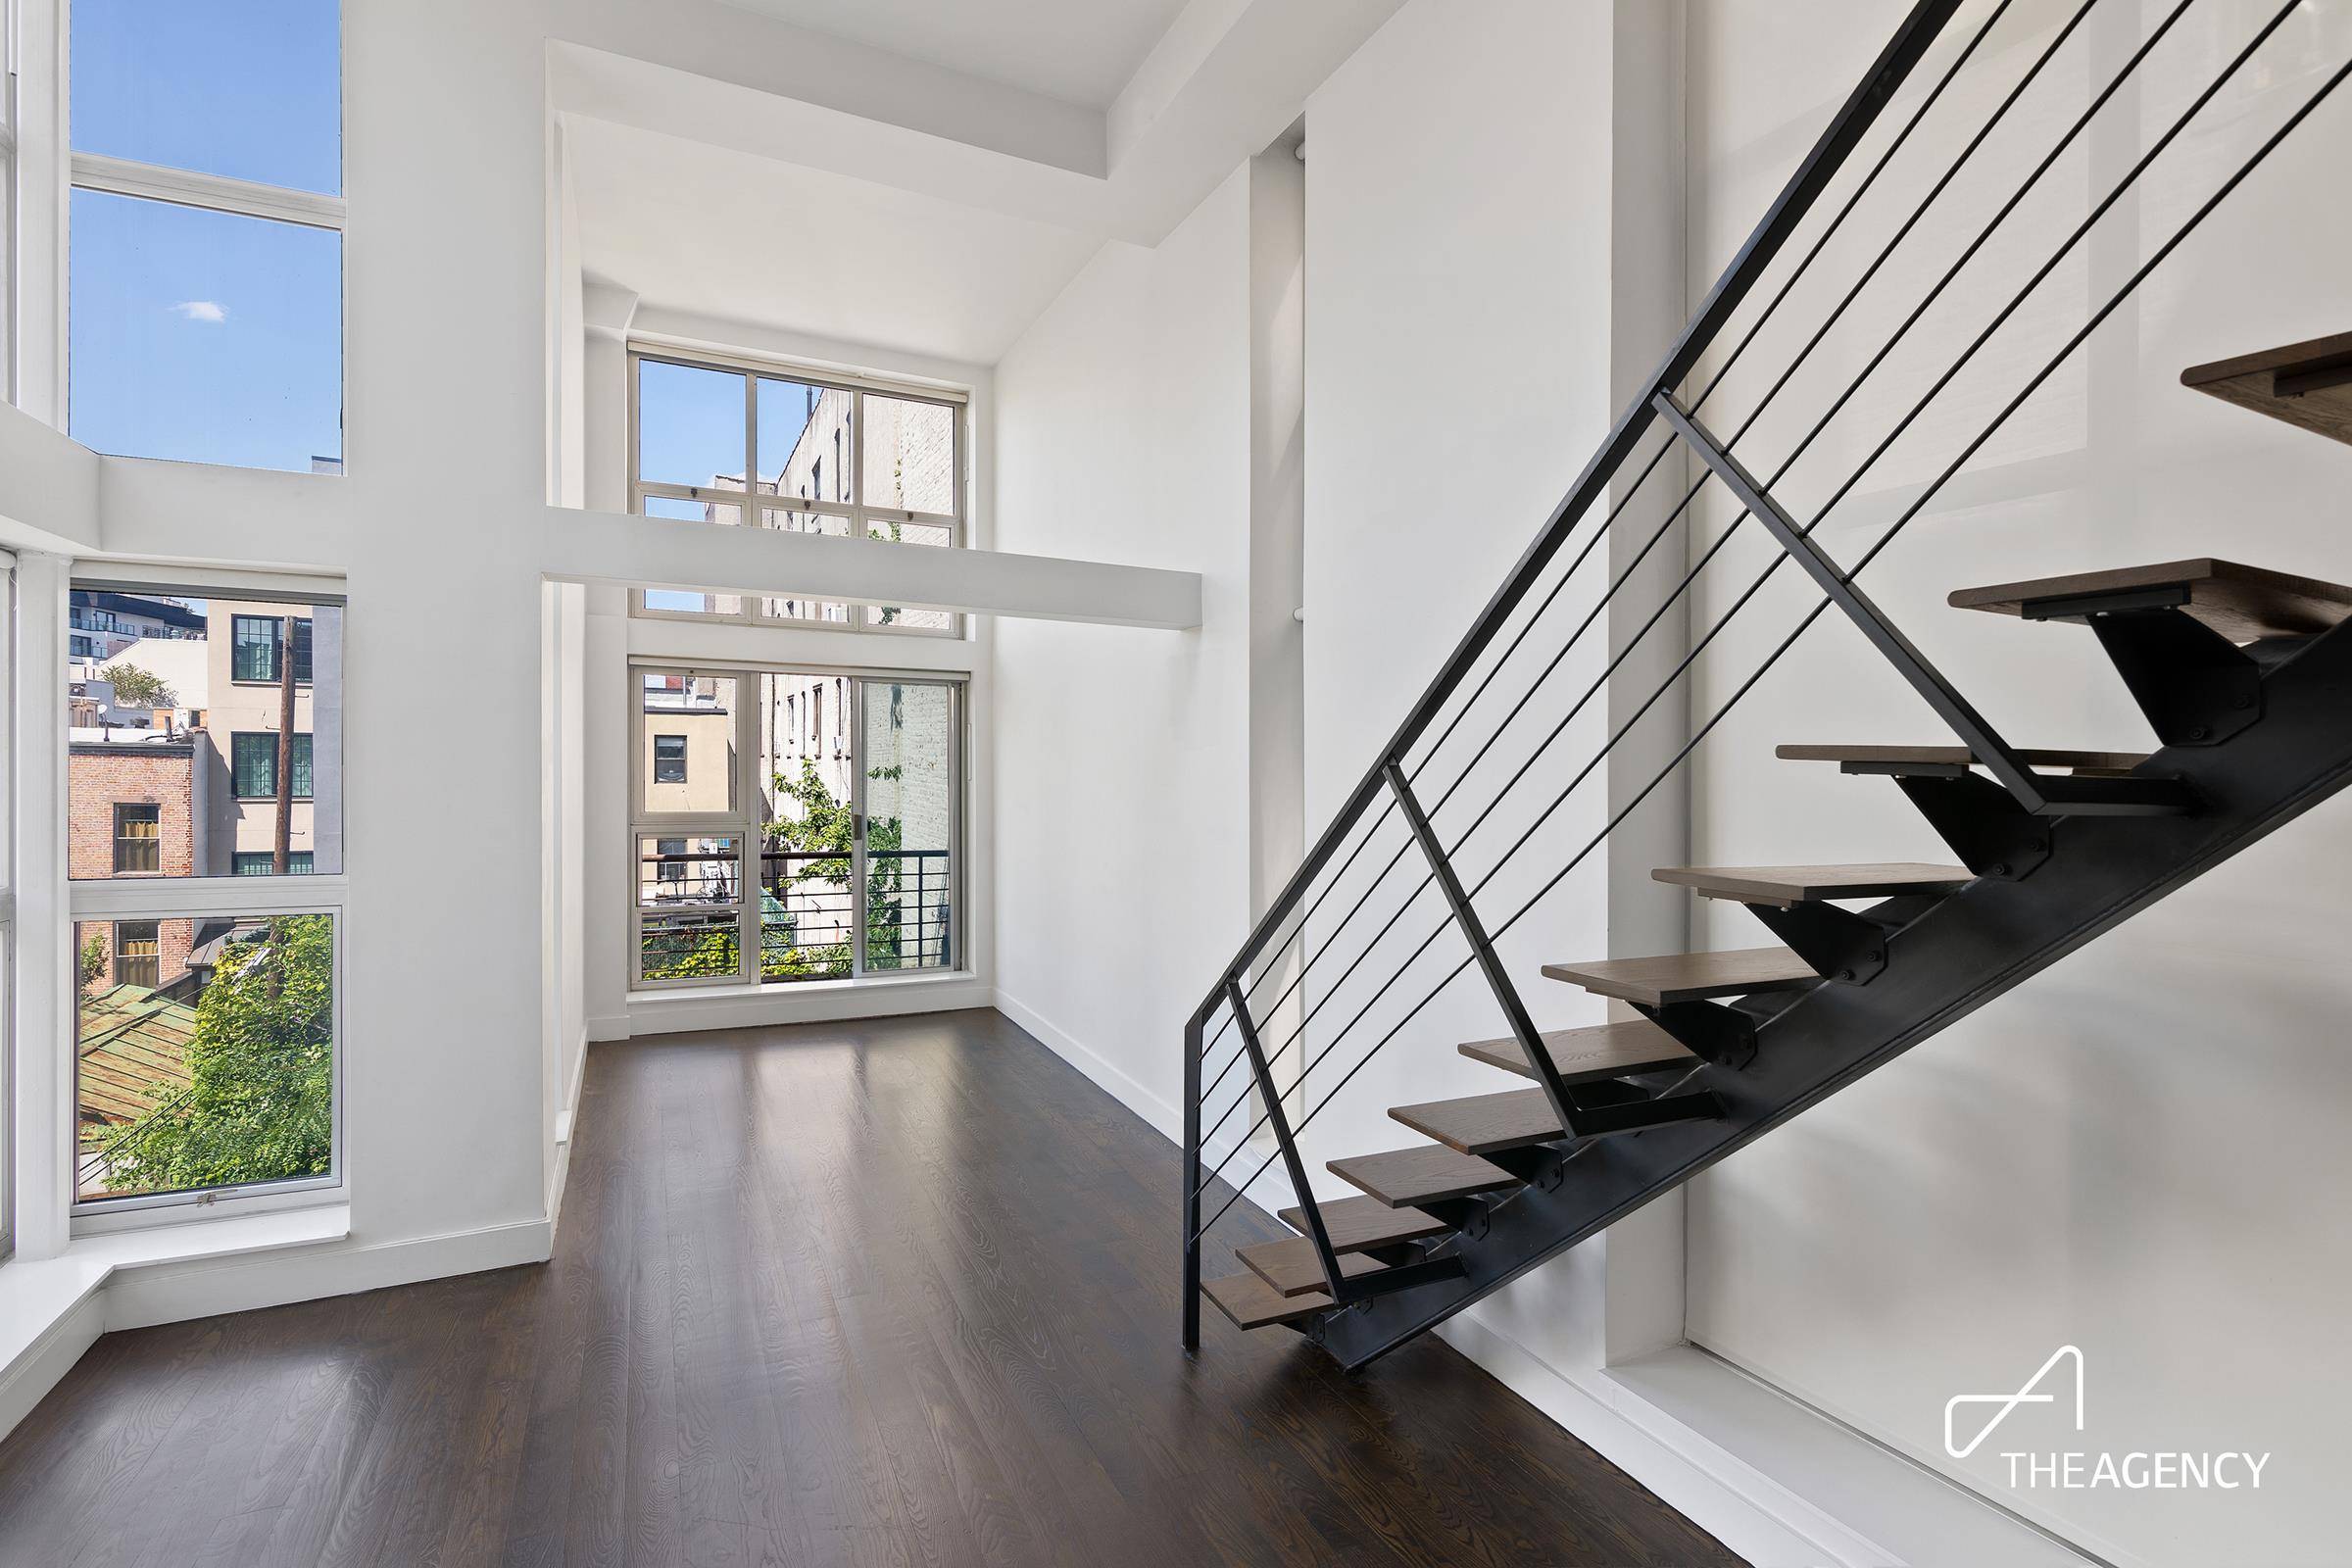 A lofty and architectural sanctuary in south Williamsburg.